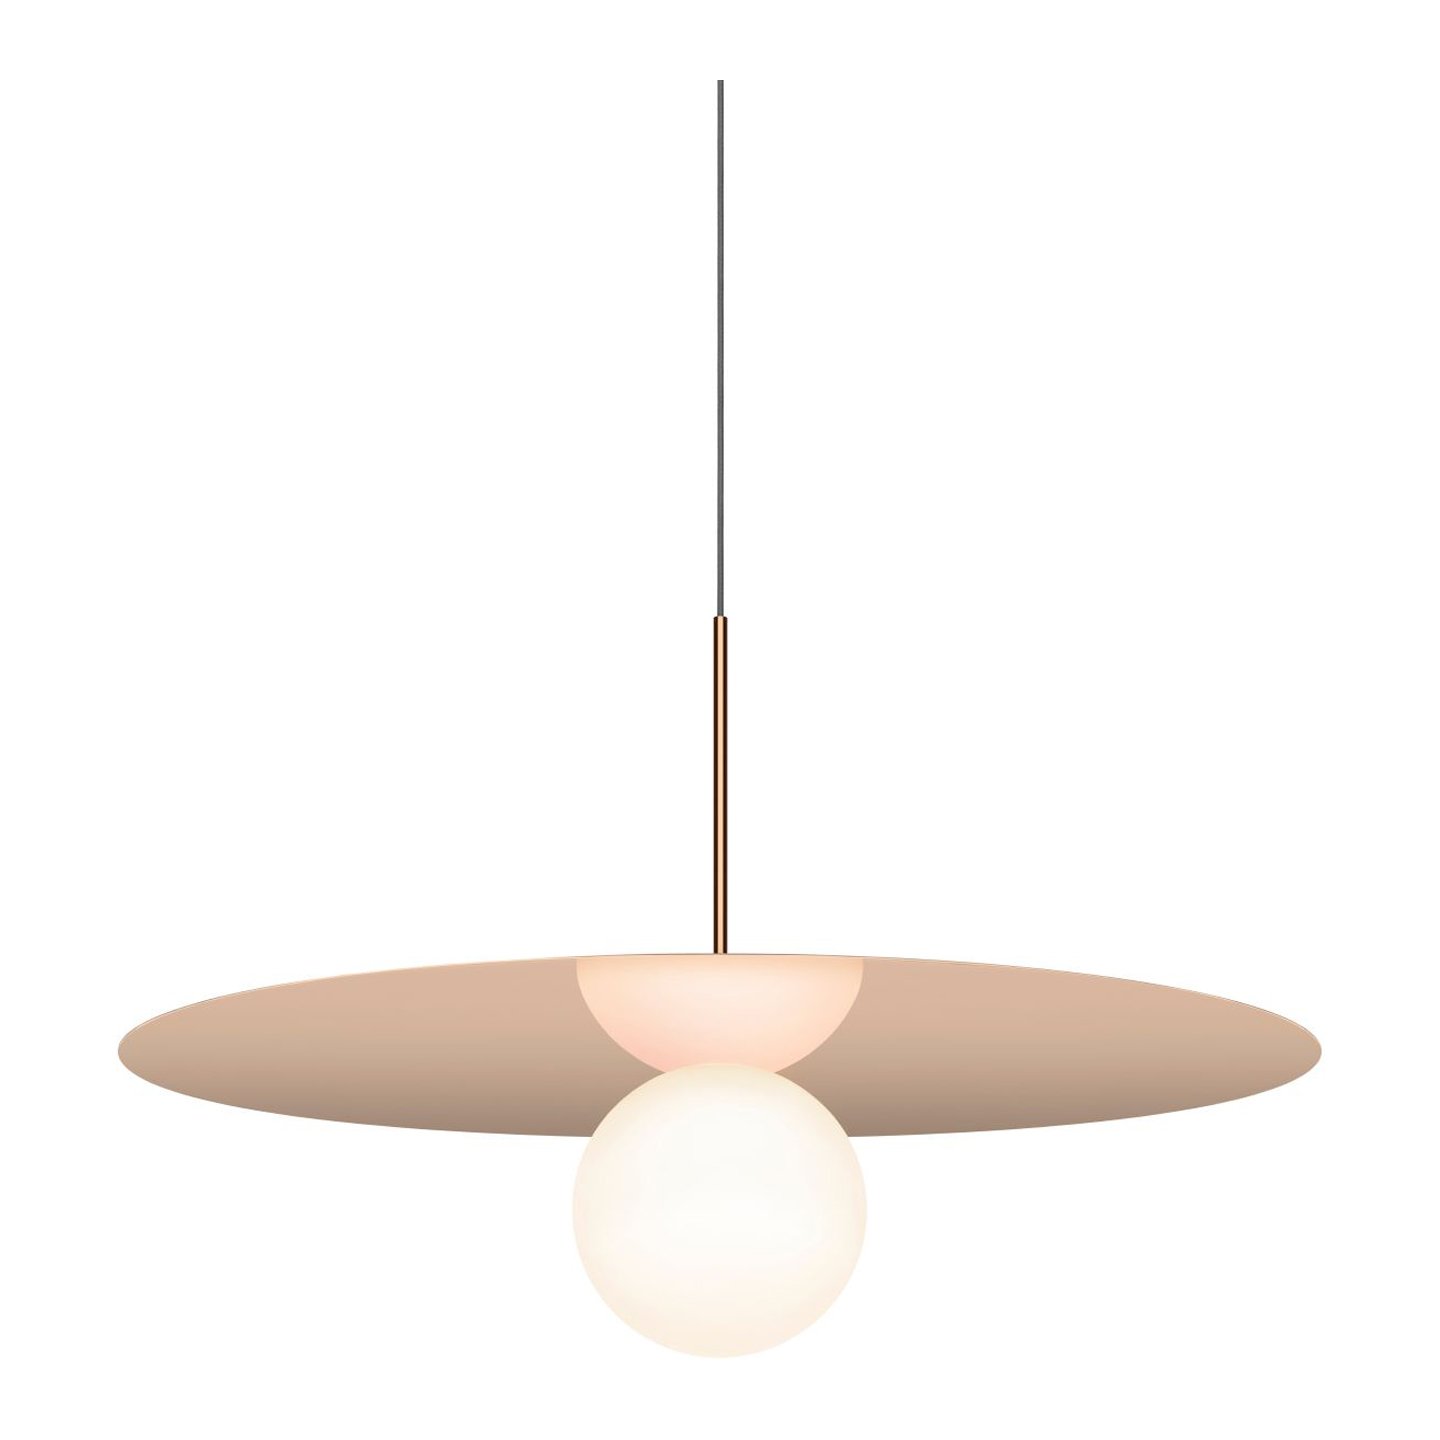 Haworth Bola DIsc Lighting with metal disc above light bulb with wire coming down